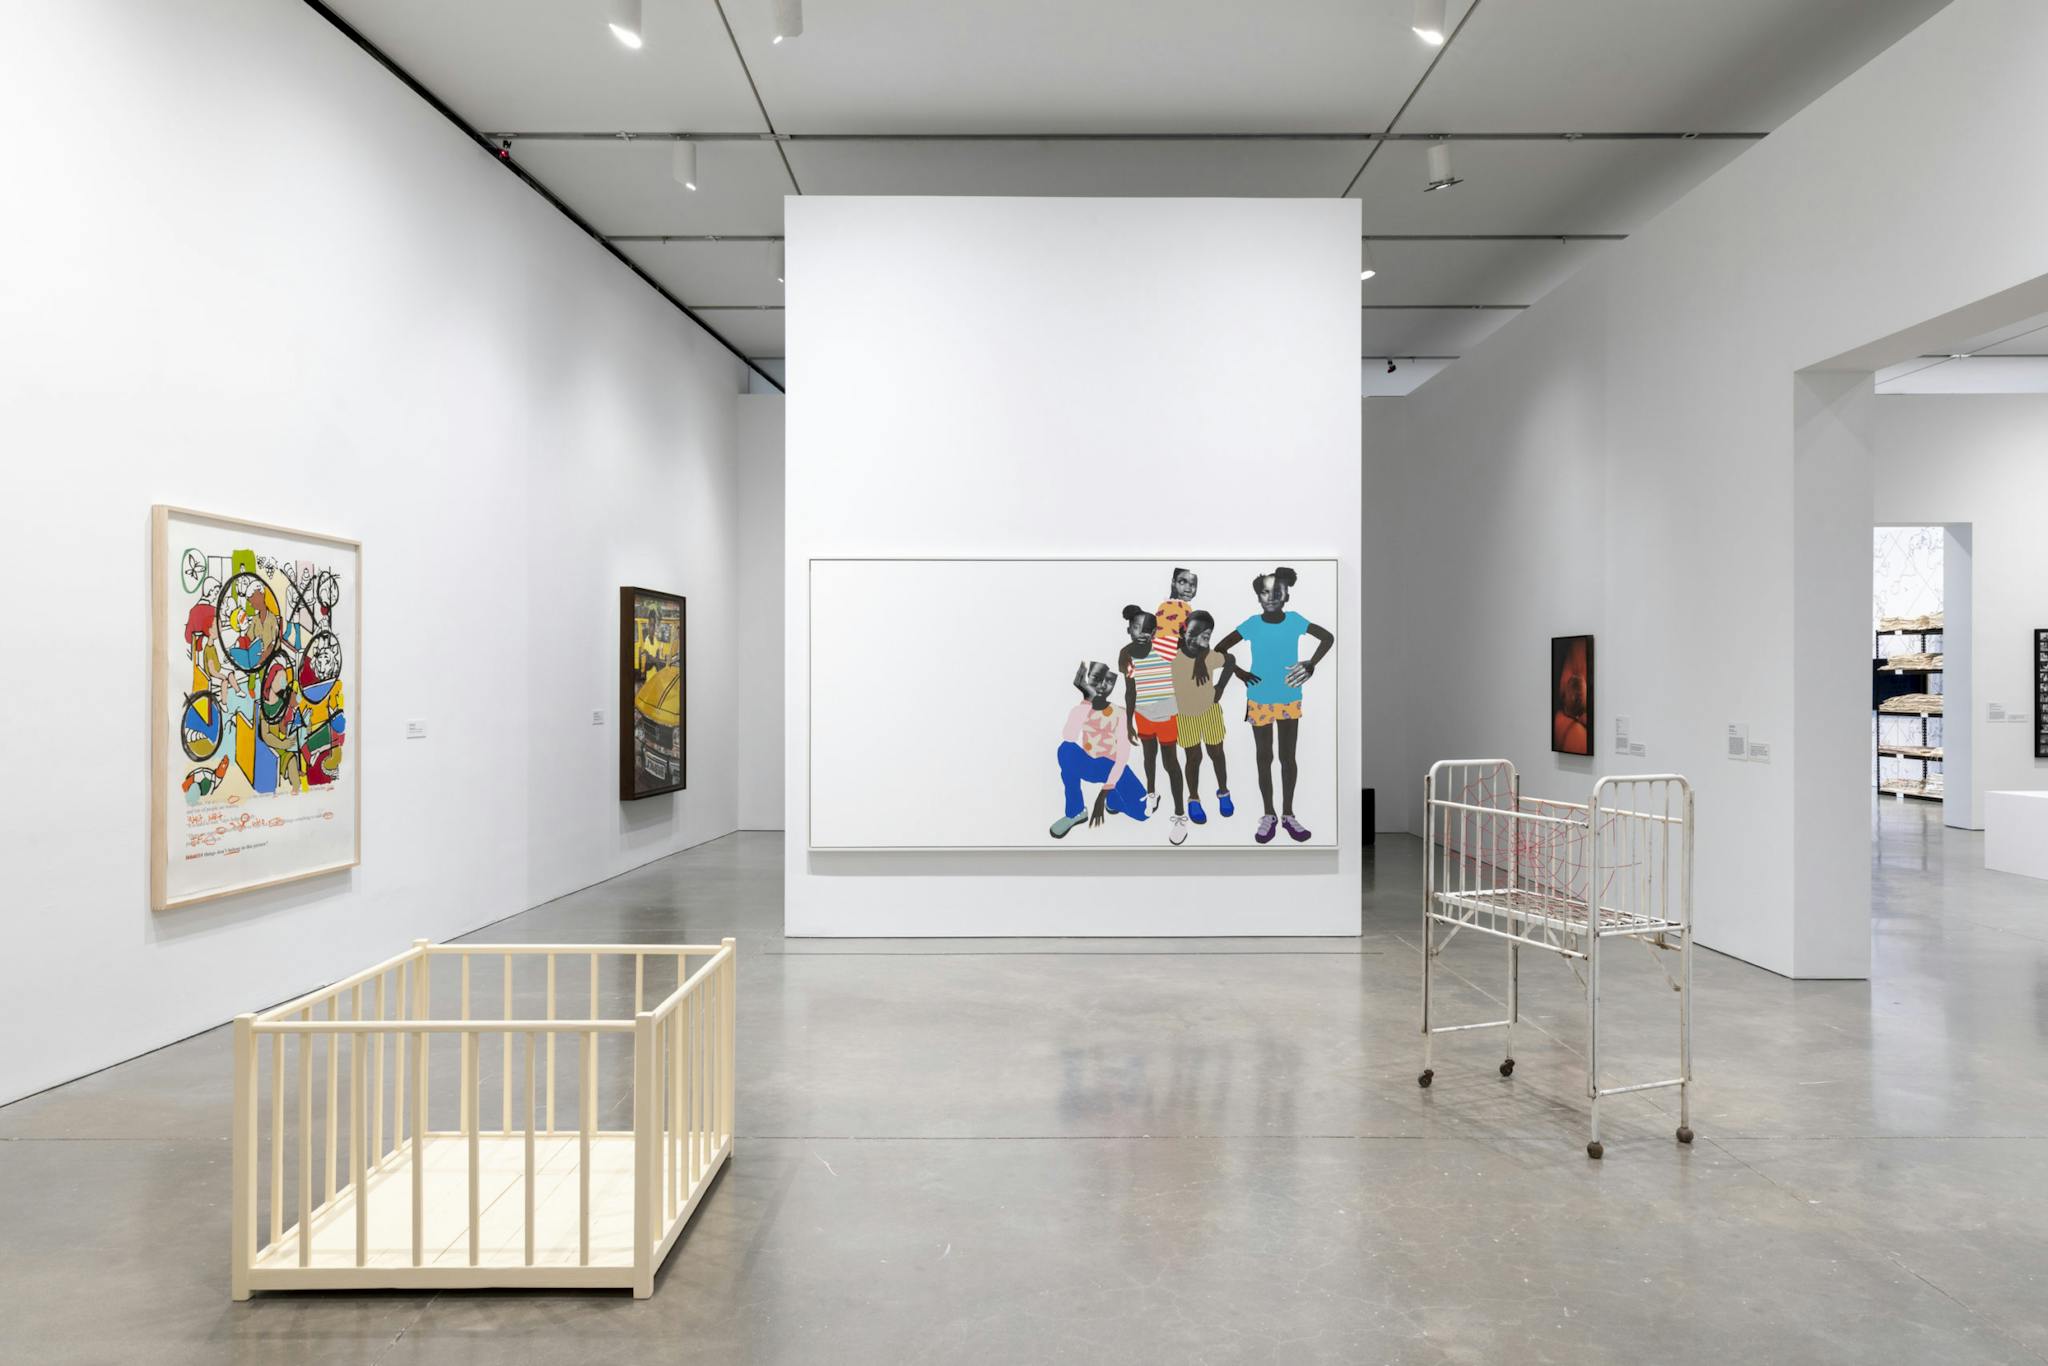 An installation features a beige crib and a colorful design of children, set against a white wall.